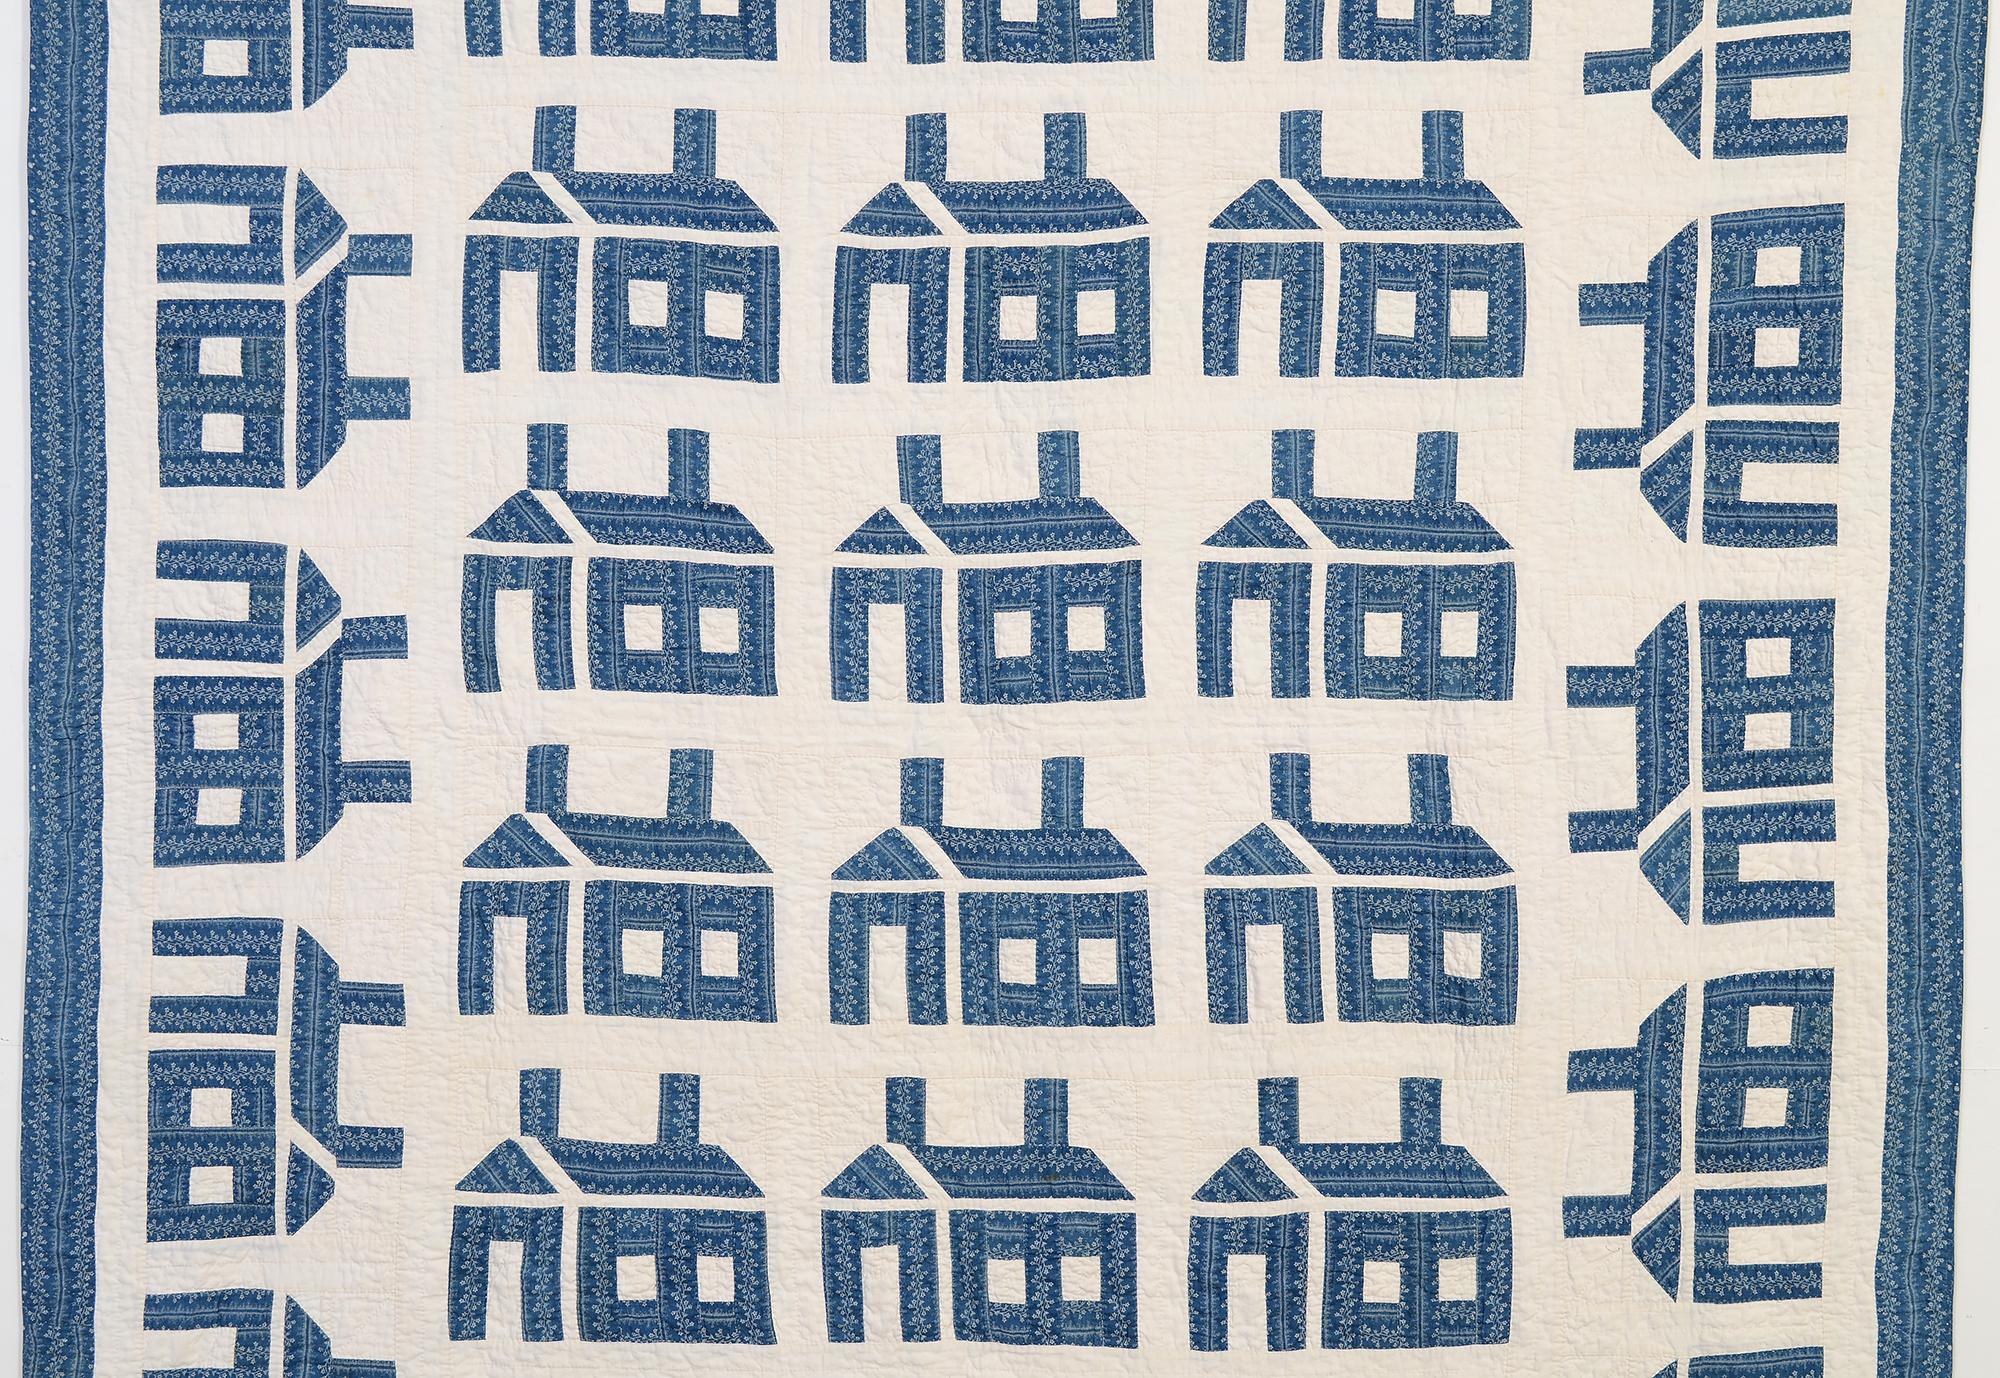 The Schoolhouse is one of America's favourite quilt patterns. This fine example is well designed with houses at right angles framing the primary group. It's interesting that the bottom row can be seen as either part of the vertical grouping or a